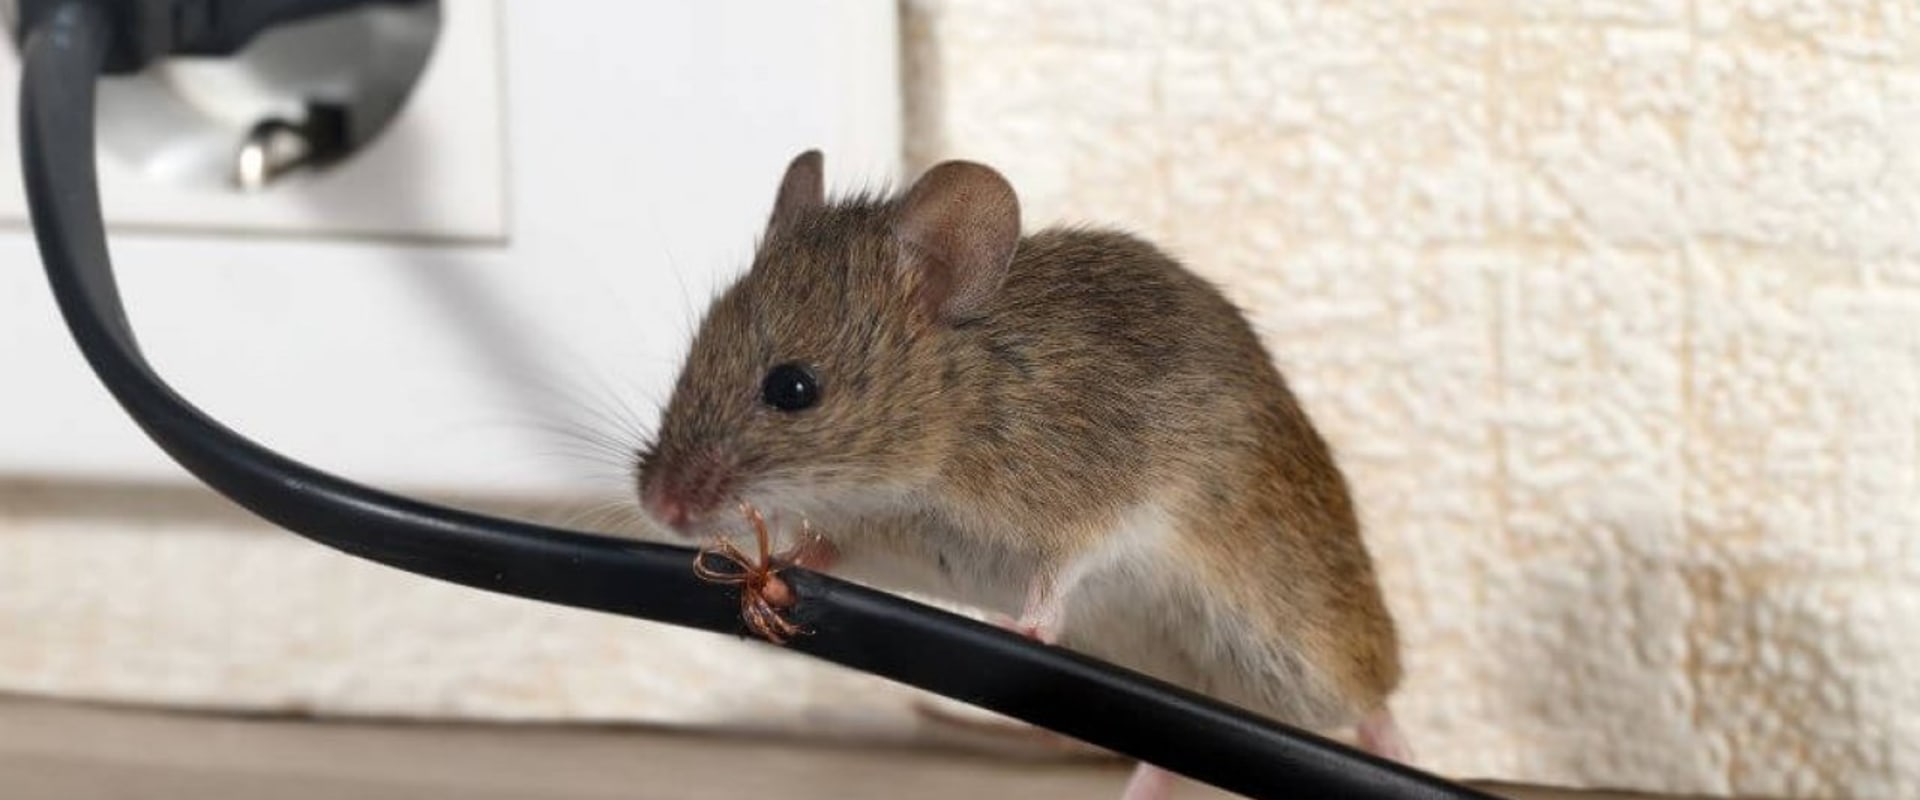 What is the best repellent to get rid of mice?